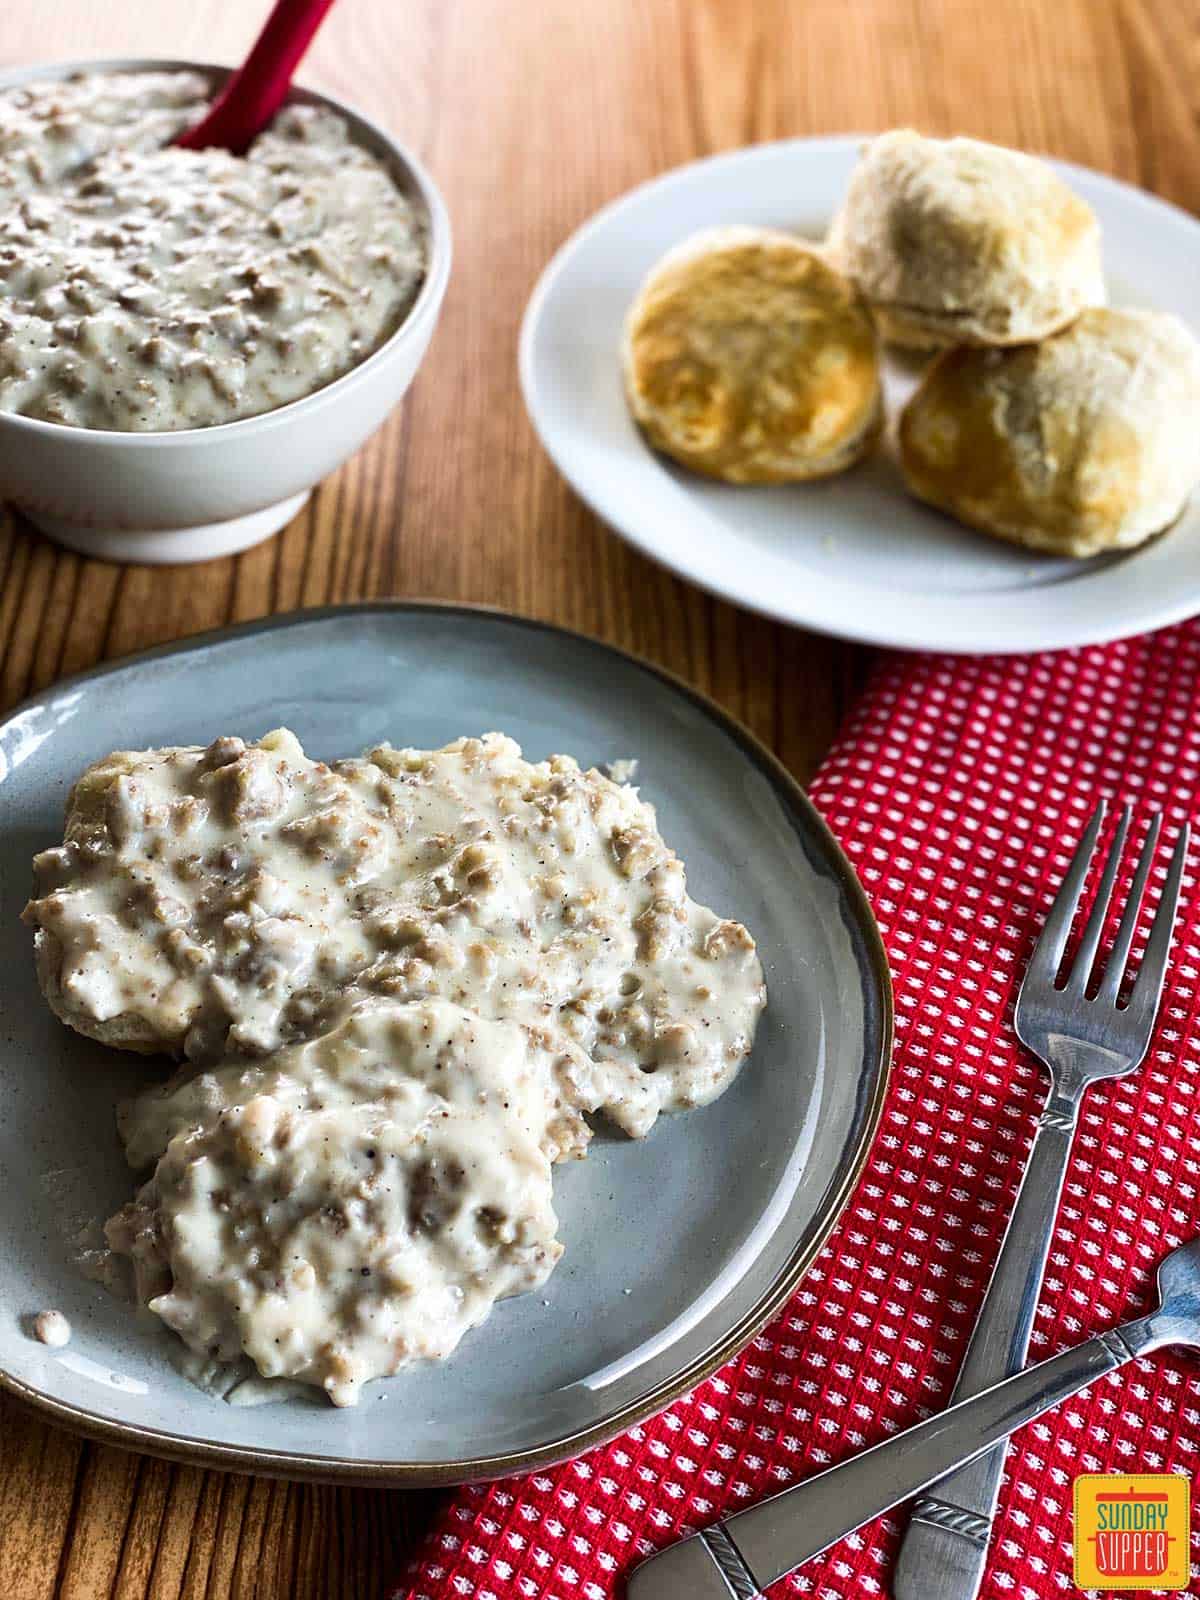 Instant pot sausage gravy served over biscuits next to a plate of biscuits and bowl of gravy